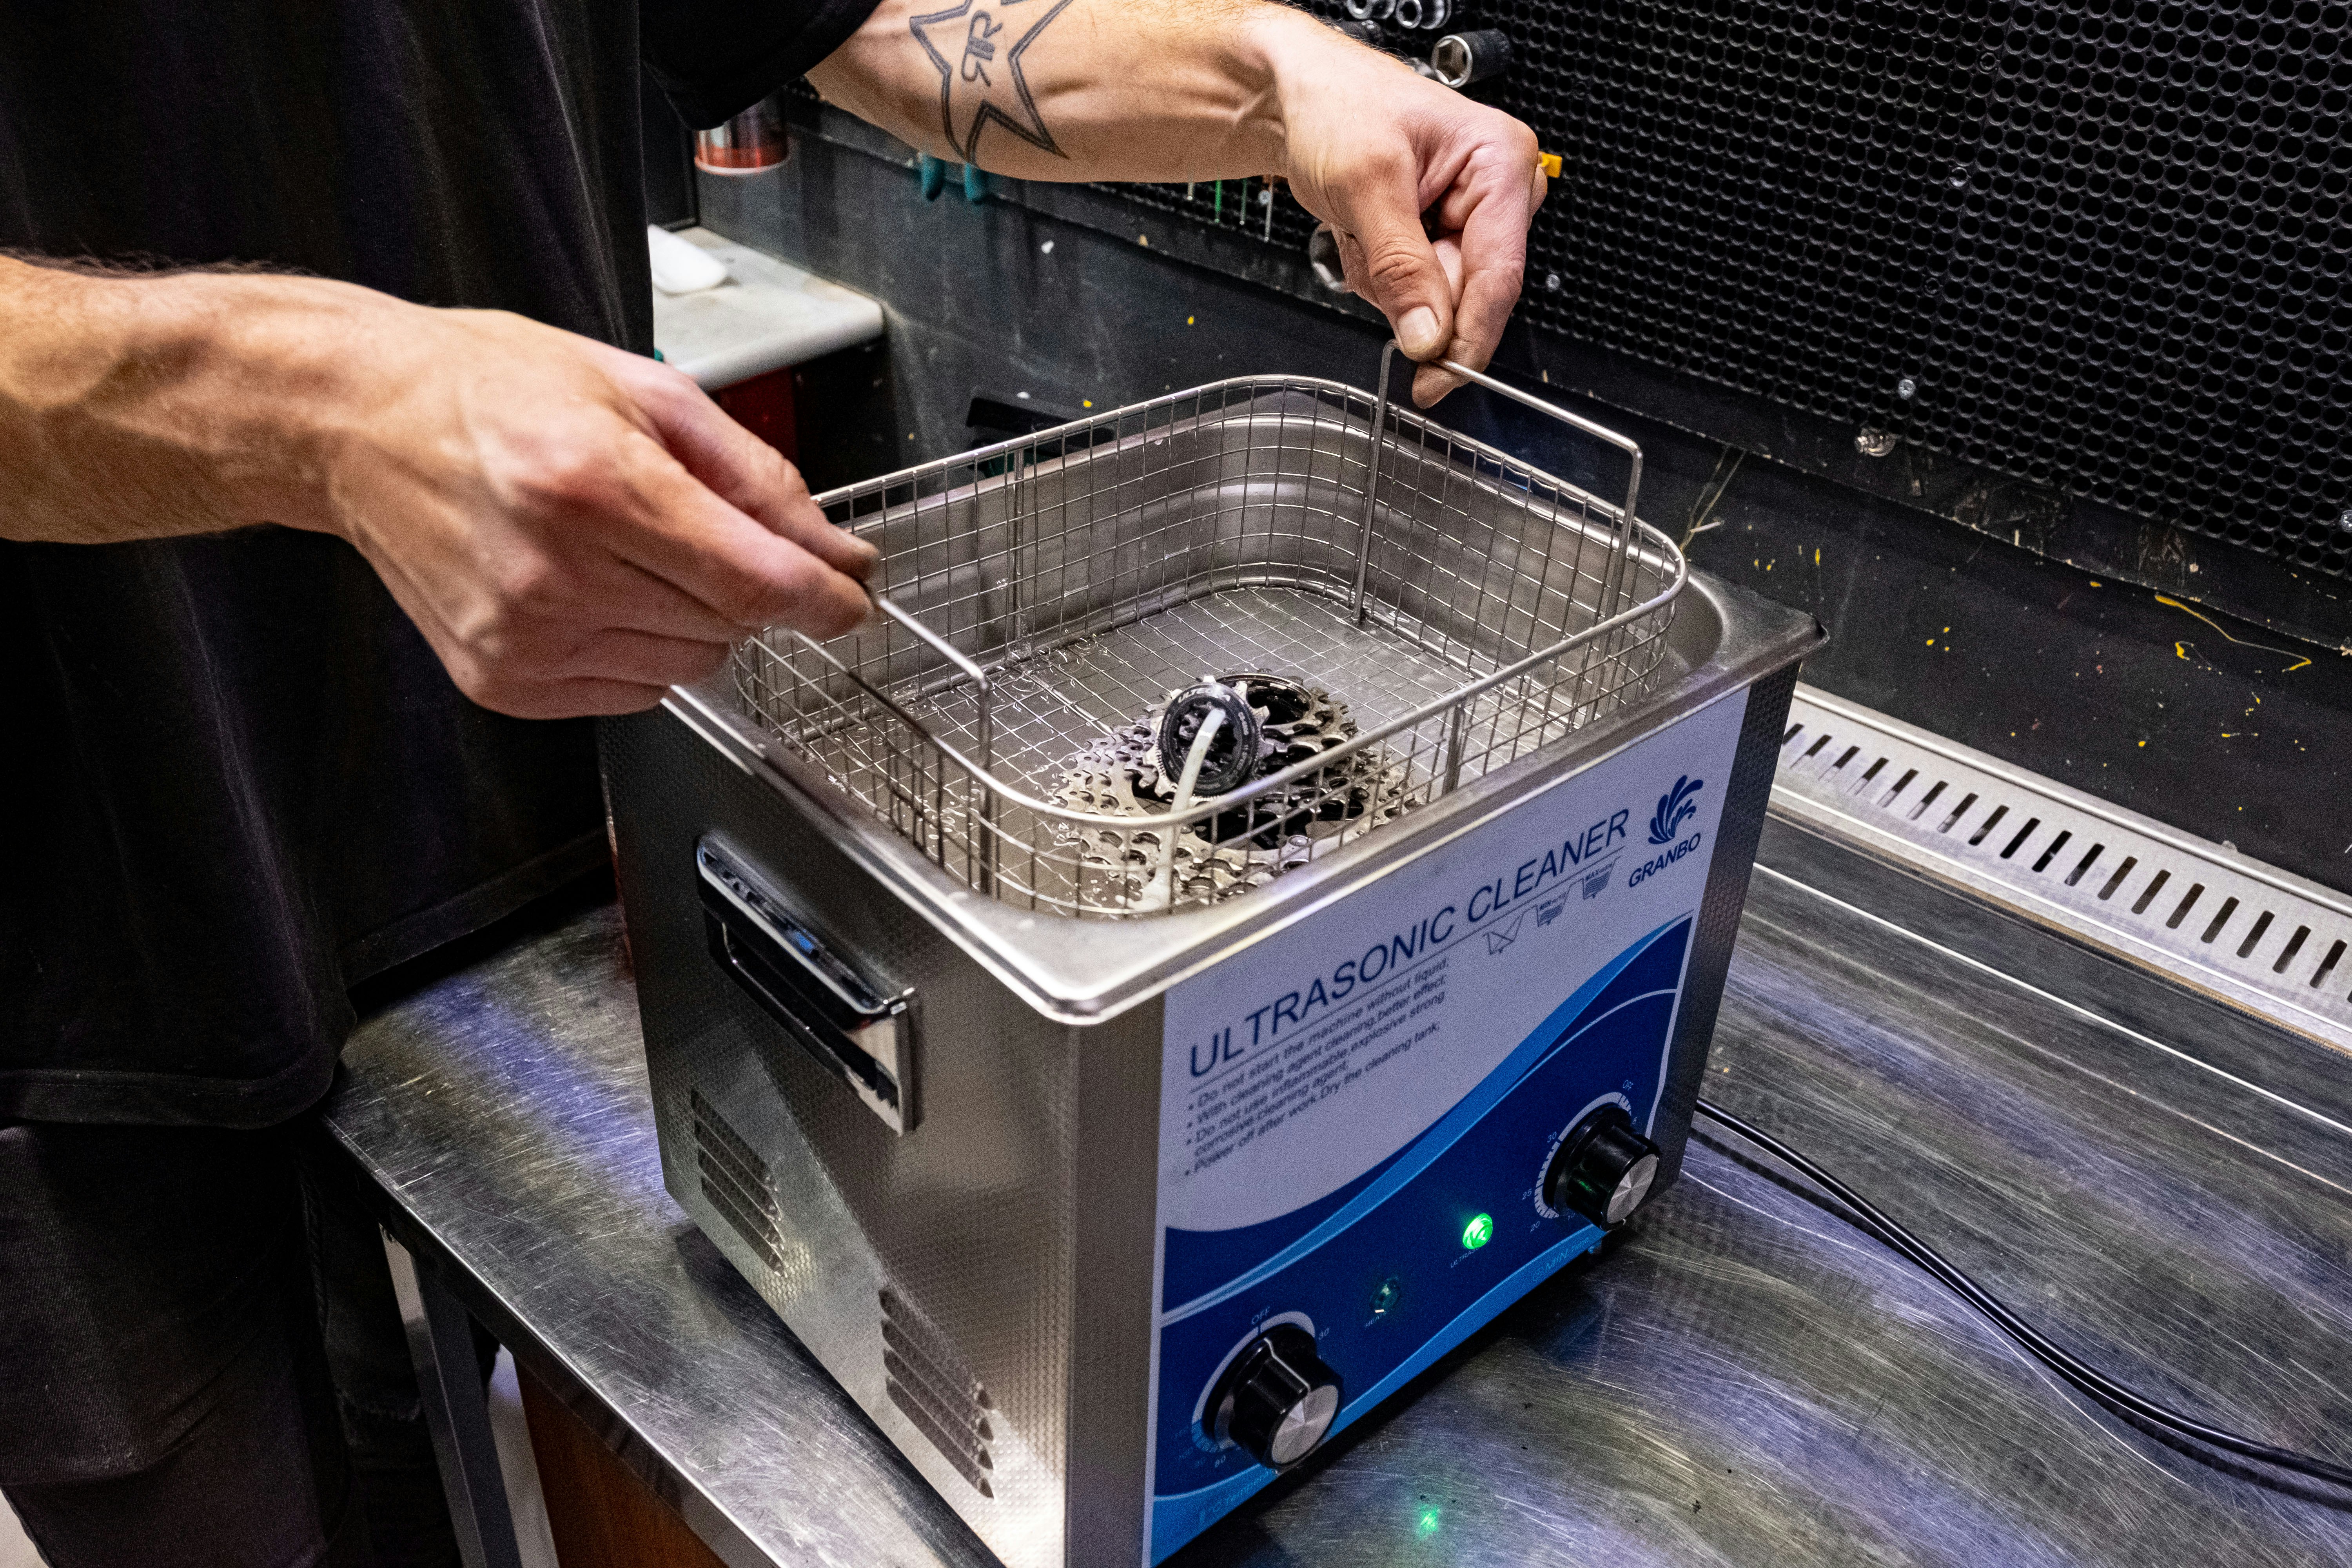 cleaning a bicycle transmission in an ultrasonic bath